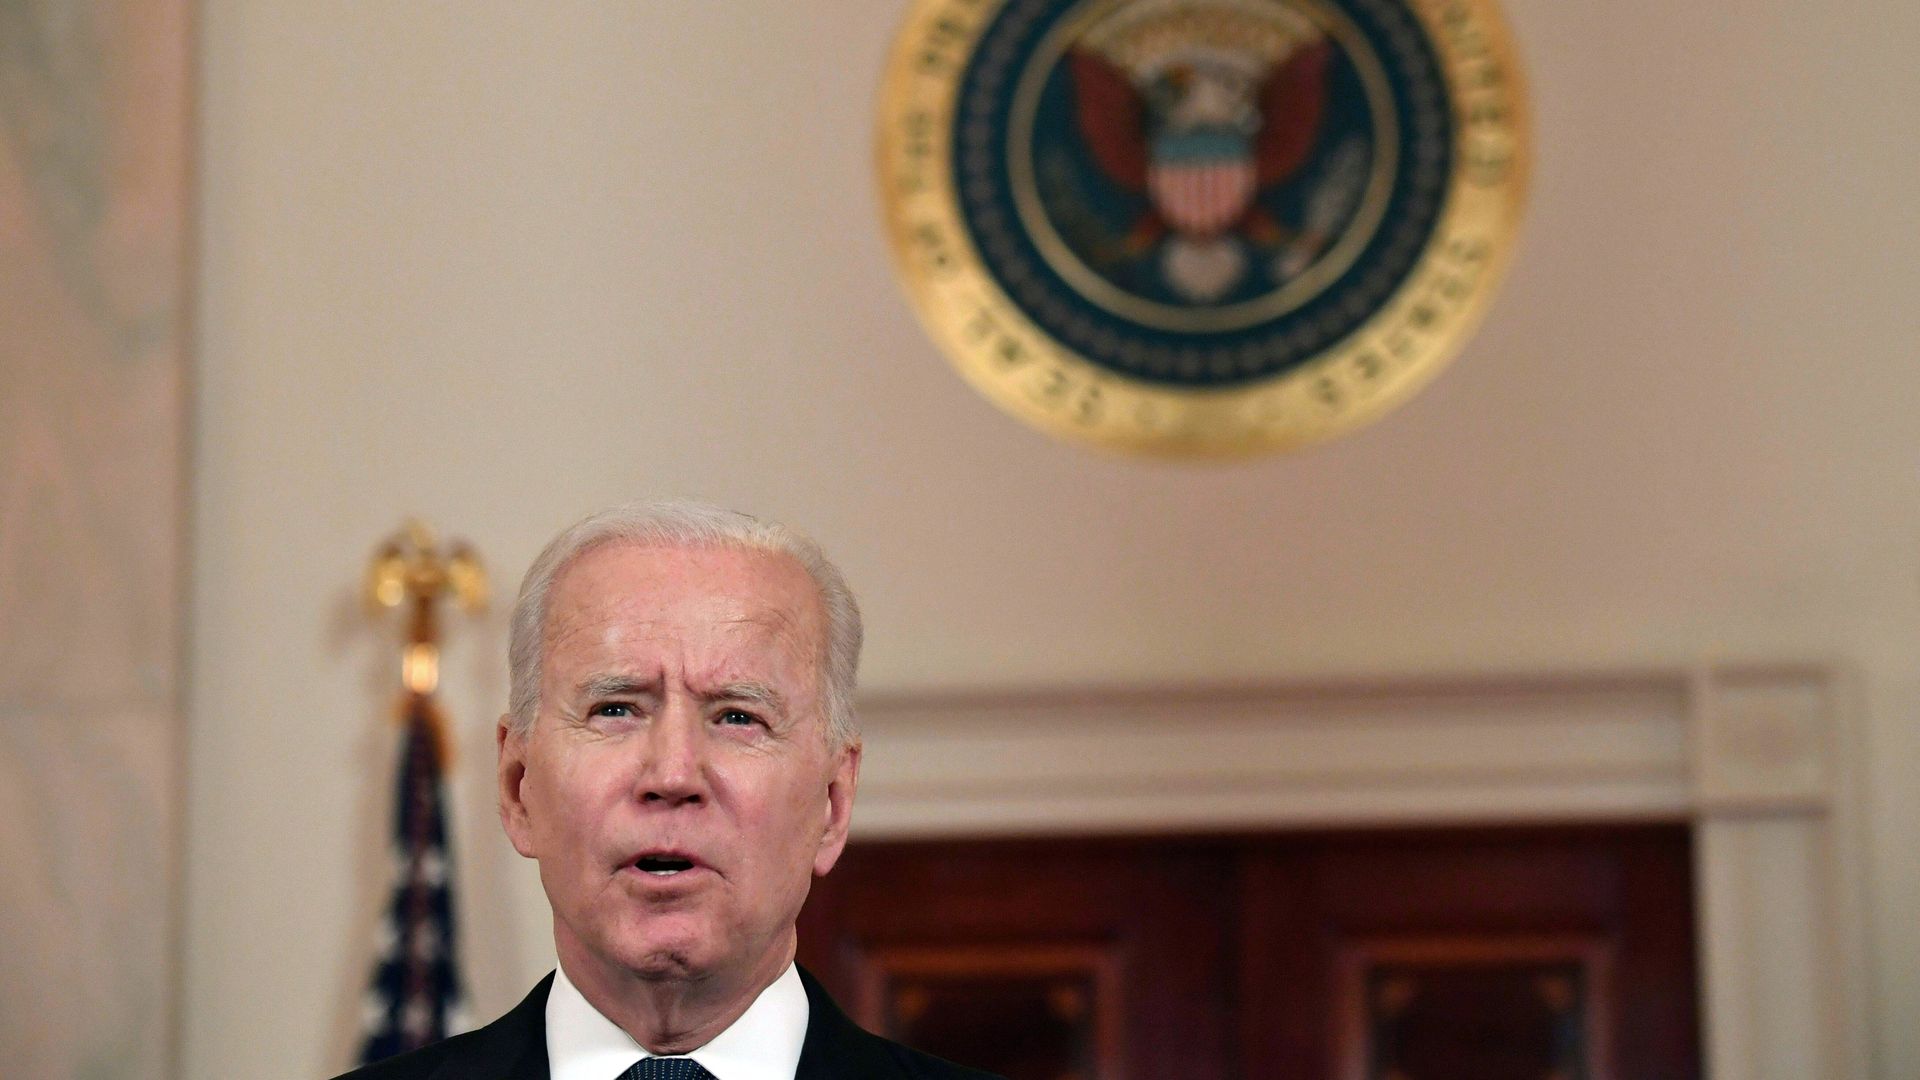 President Biden is seen delivering remarks about a cease-fire in the fighting between the Israelis and Palestinians.